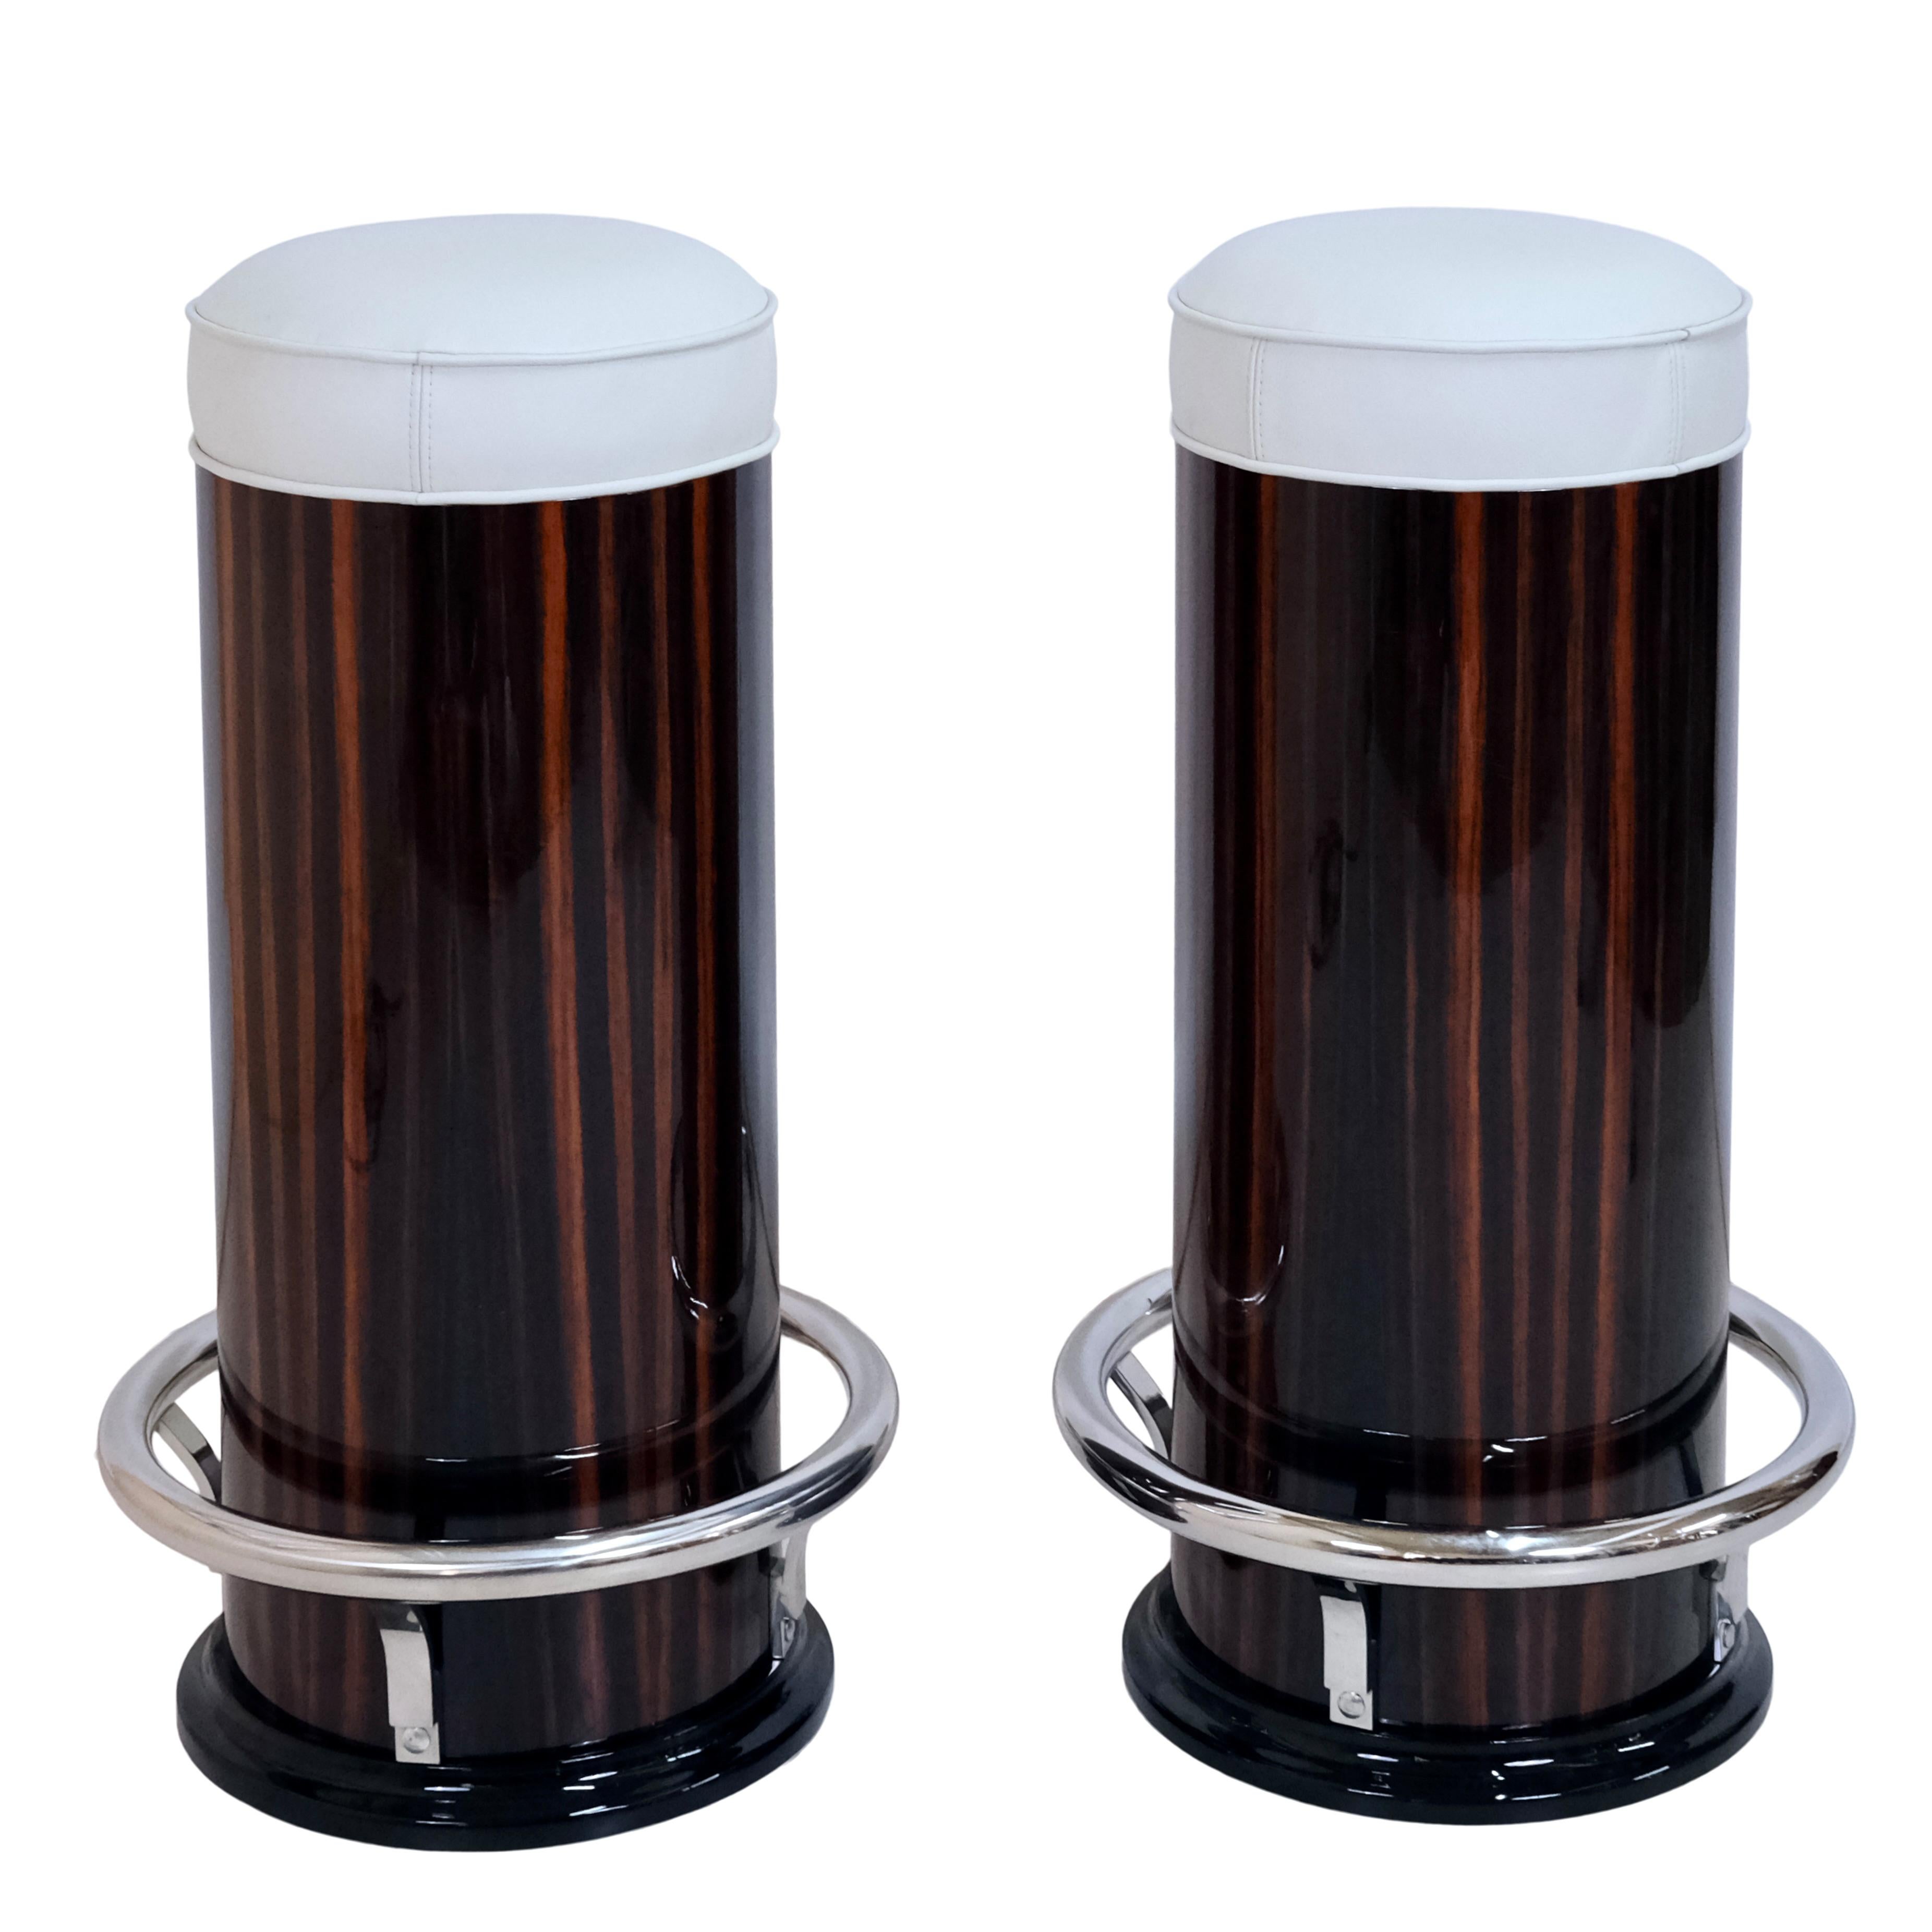 A pair of pillar-shaped bar stools

Macassar veneer, high gloss lacquer finish with black lacquer accents
Chrome-plated metal appliqués
Upholstered seat, real leather

Made in the Art Deco style
Made in Germany

Dimensions, per